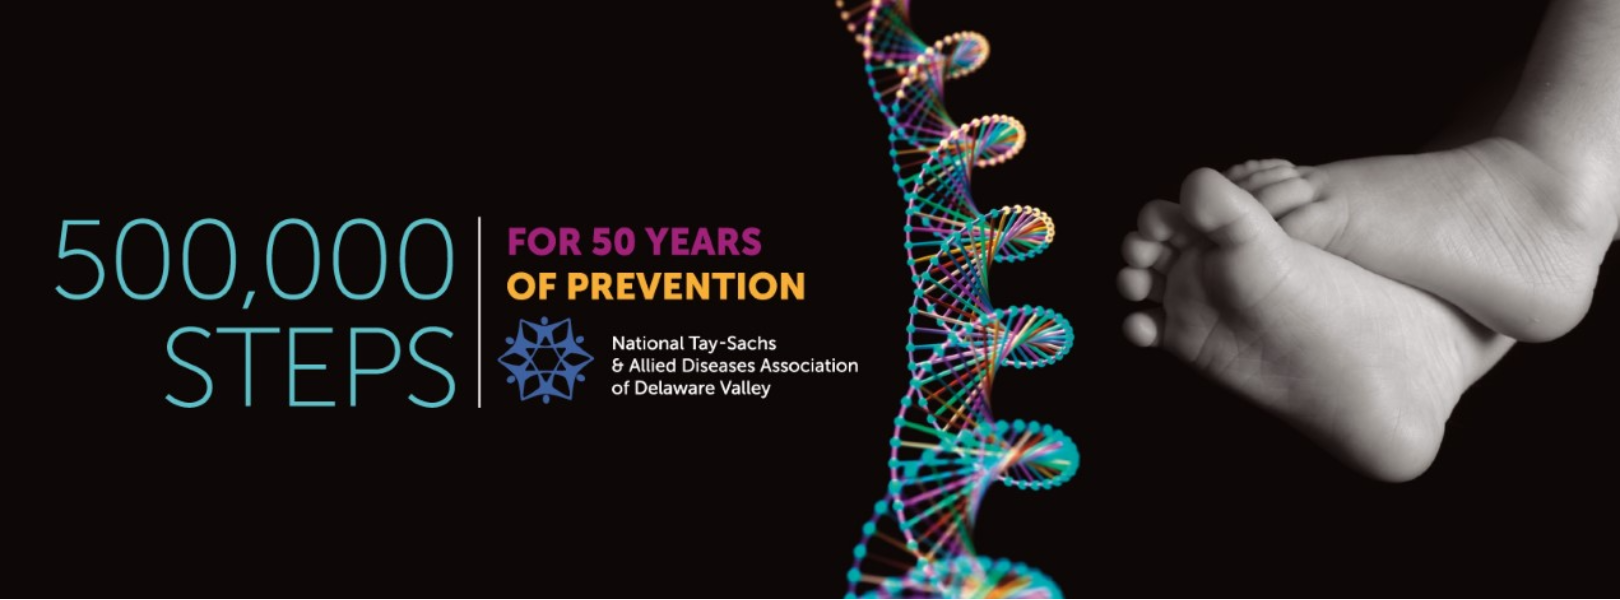 500,000 steps for 50 years of prevention